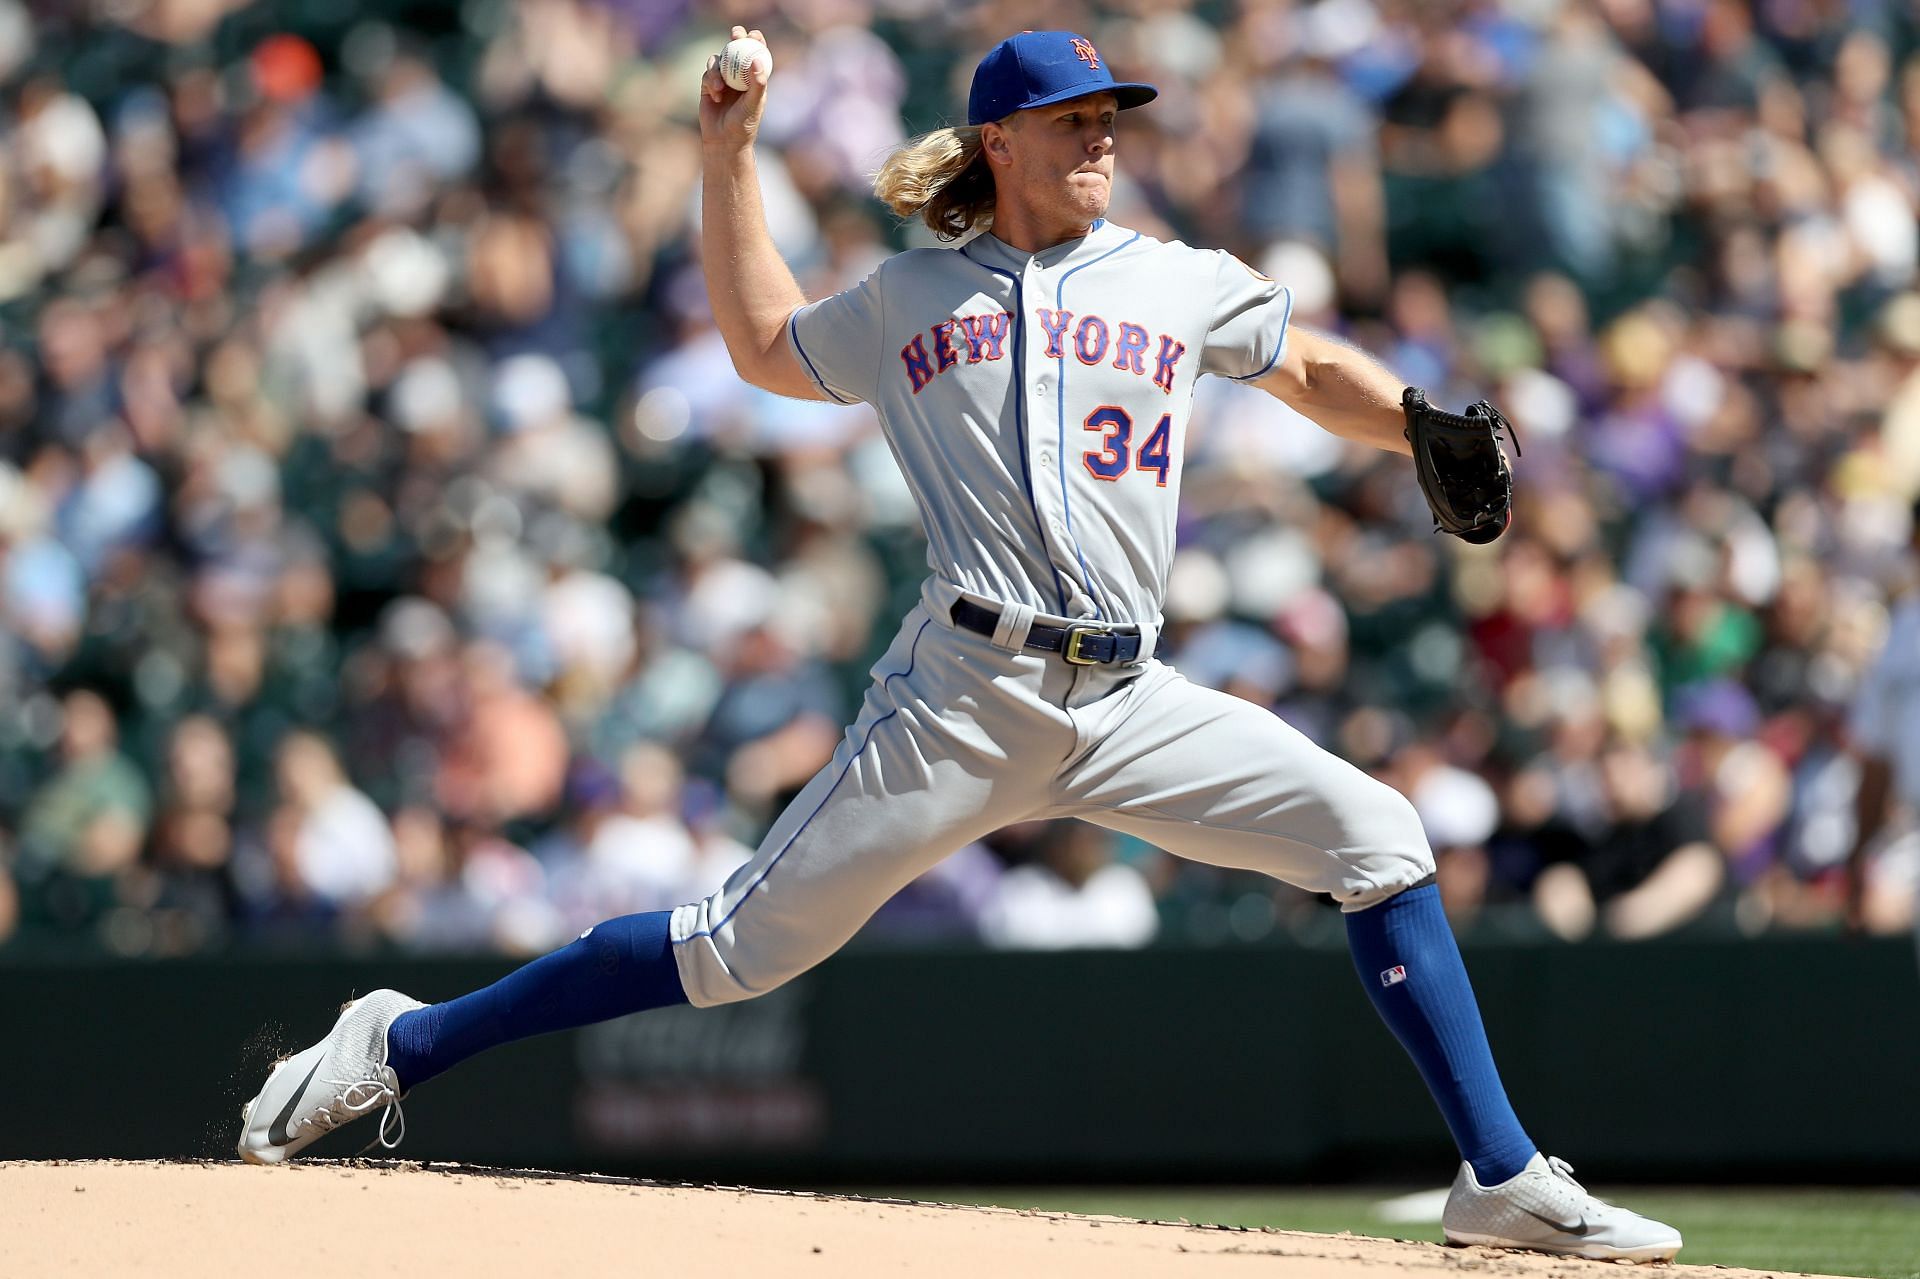 Noah Syndergaard pitches during a New York Mets v Colorado Rockies game